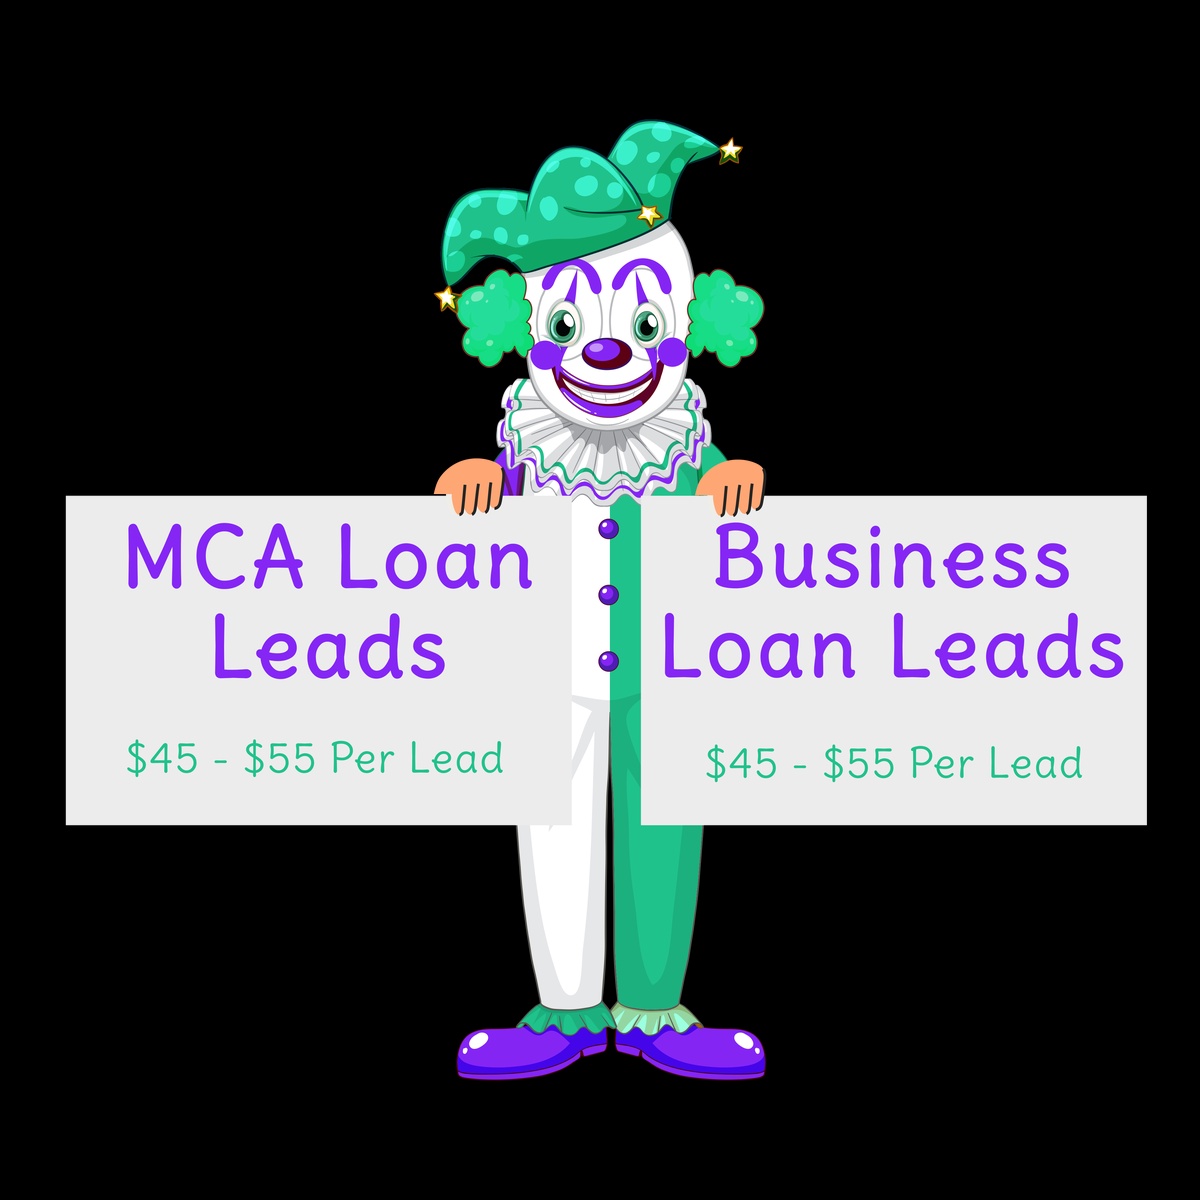 15 Proven Strategies for Generating High-Quality Business Loan Leads